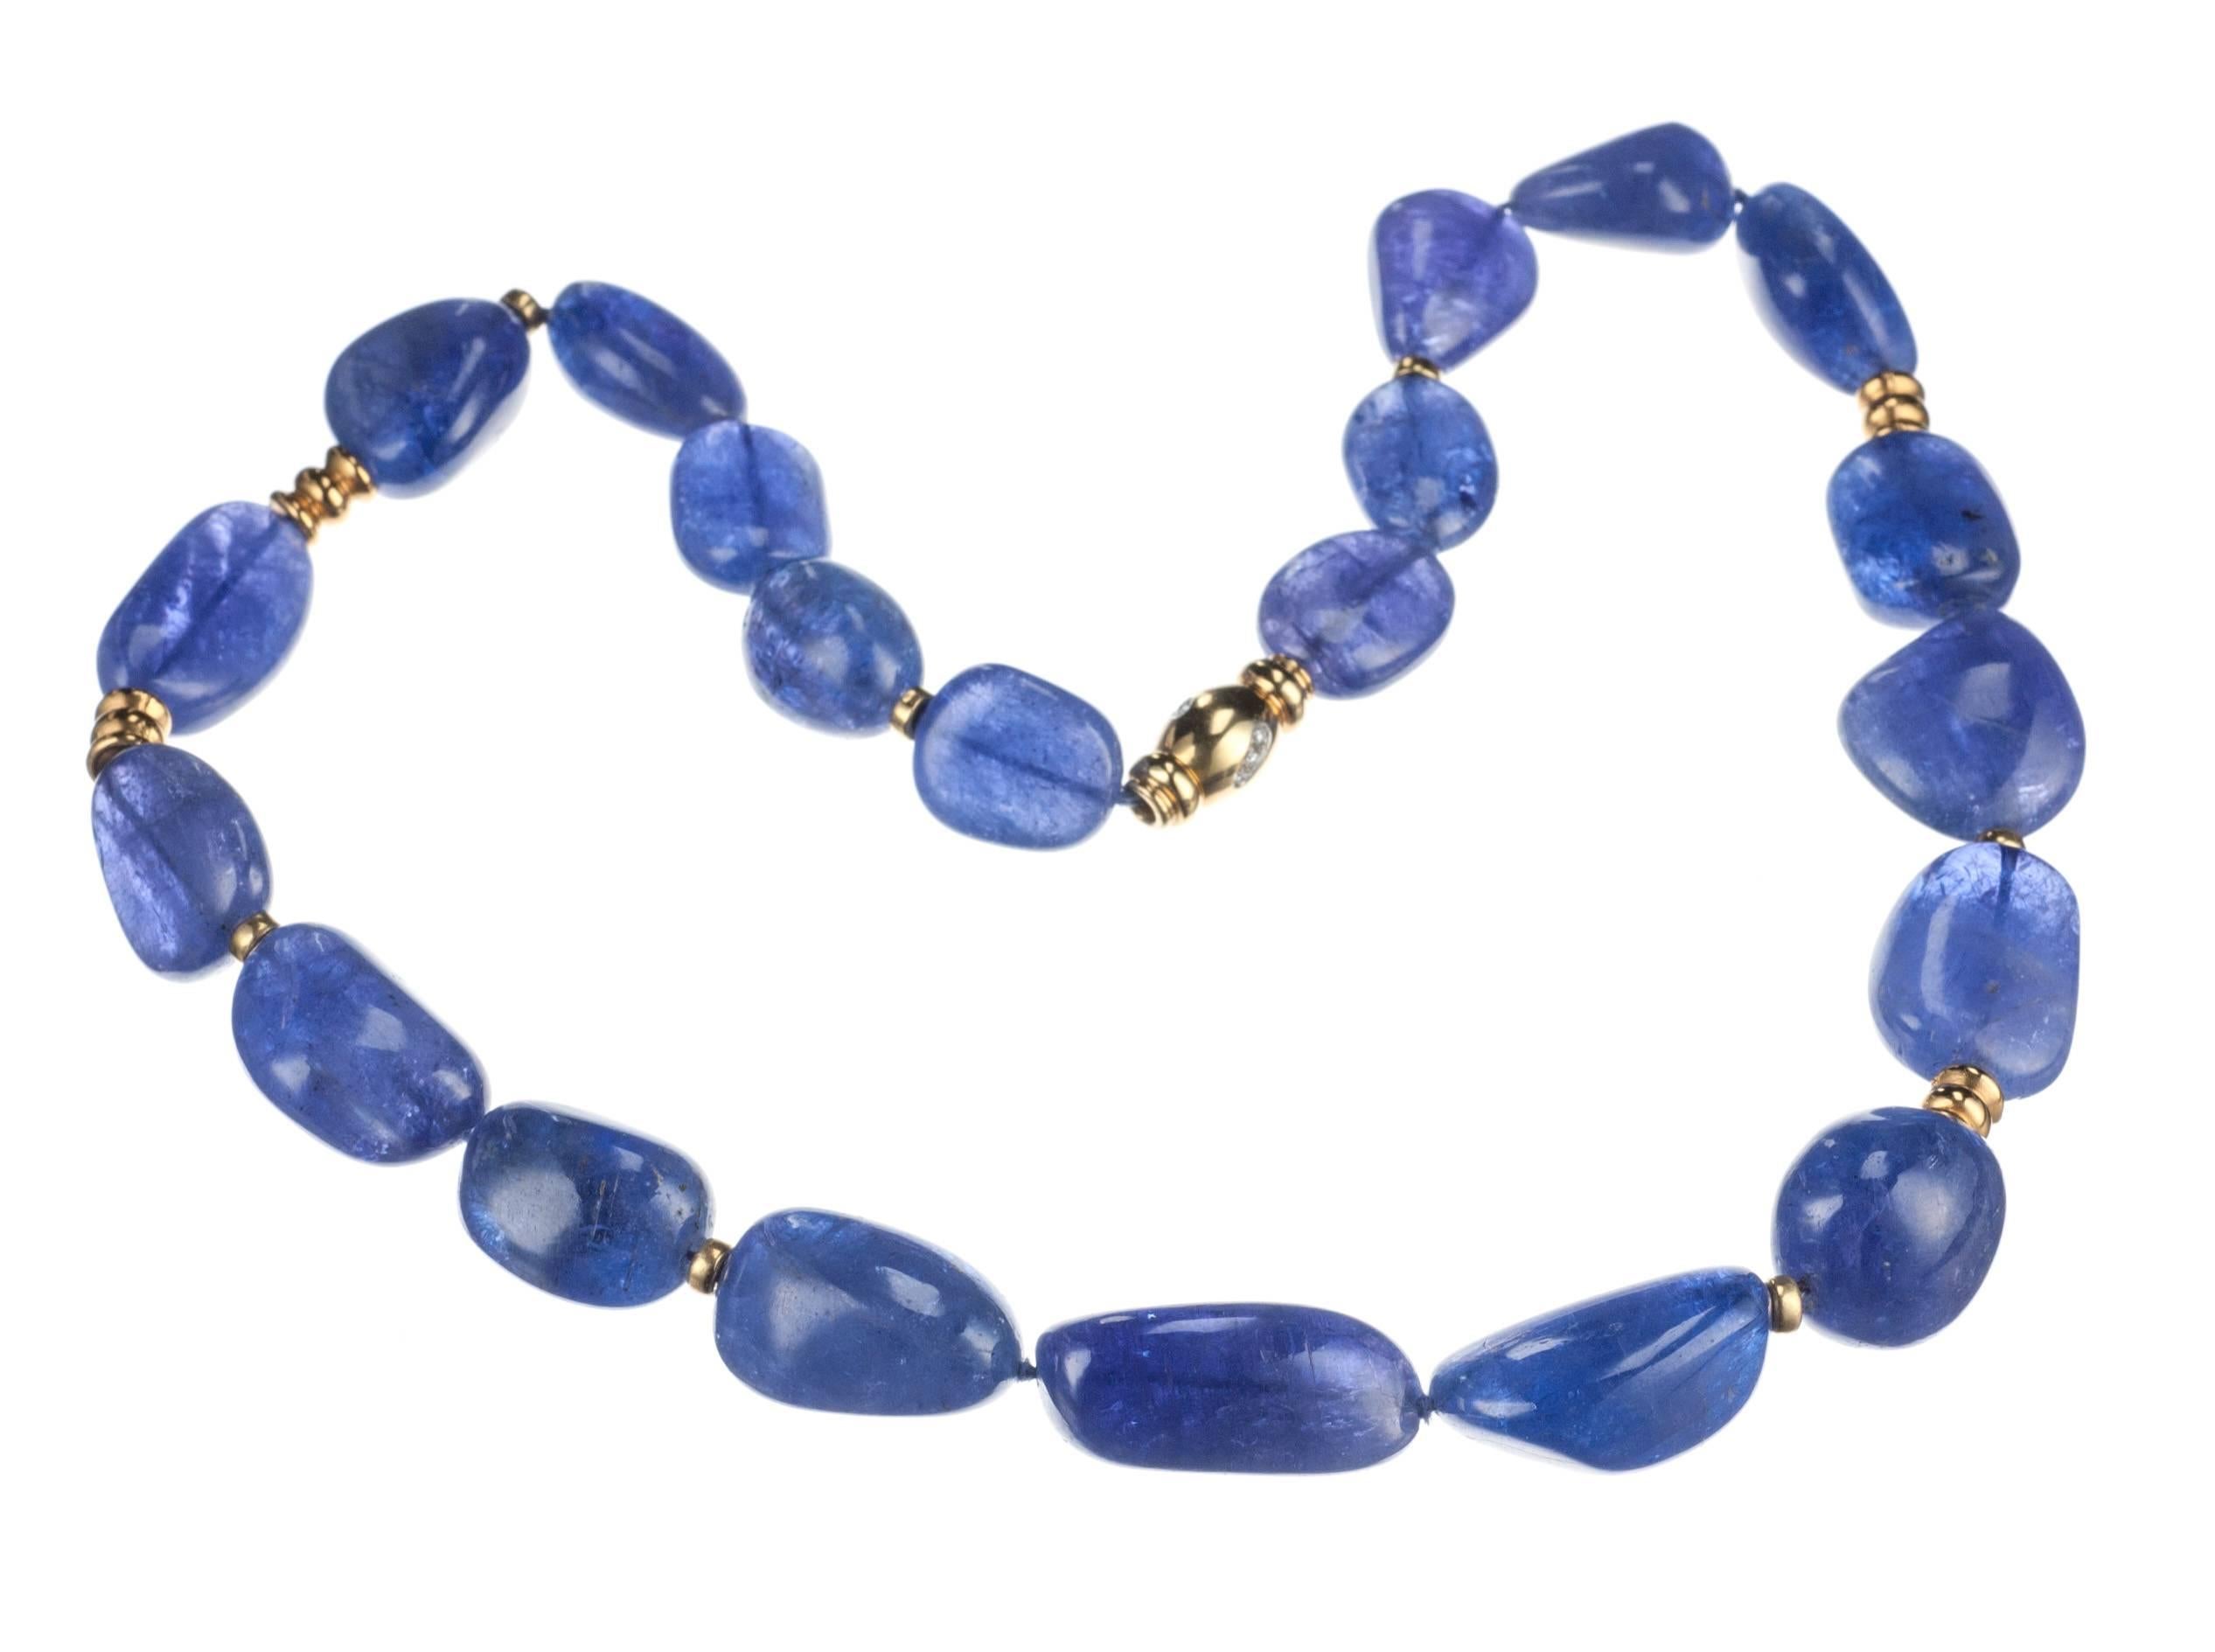 Vivid nuggets of blue-violet tanzanite are strung with 18-karat yellow gold beads and rondelles in this necklace from Elleard Heffern Fine Jewelers. The necklace is strung with an 18-karat yellow granulated clasp set with nine brilliant-cut round